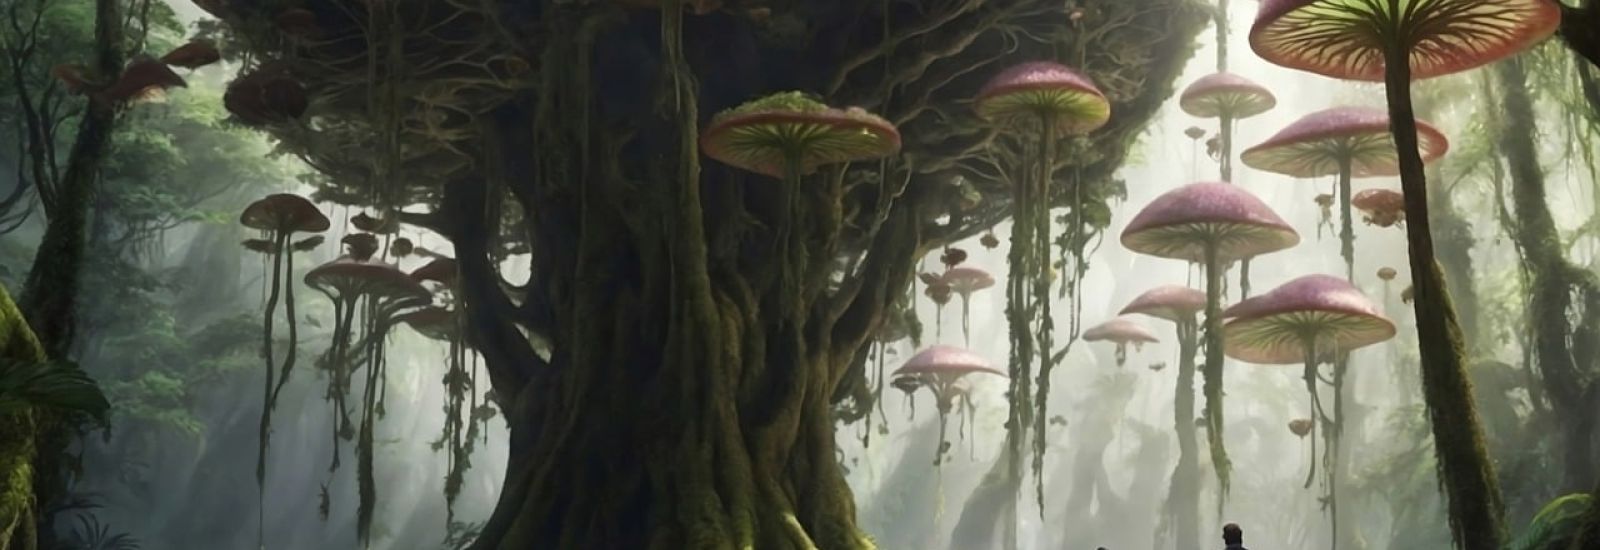 A fantast image of what Plants could look like on other worlds